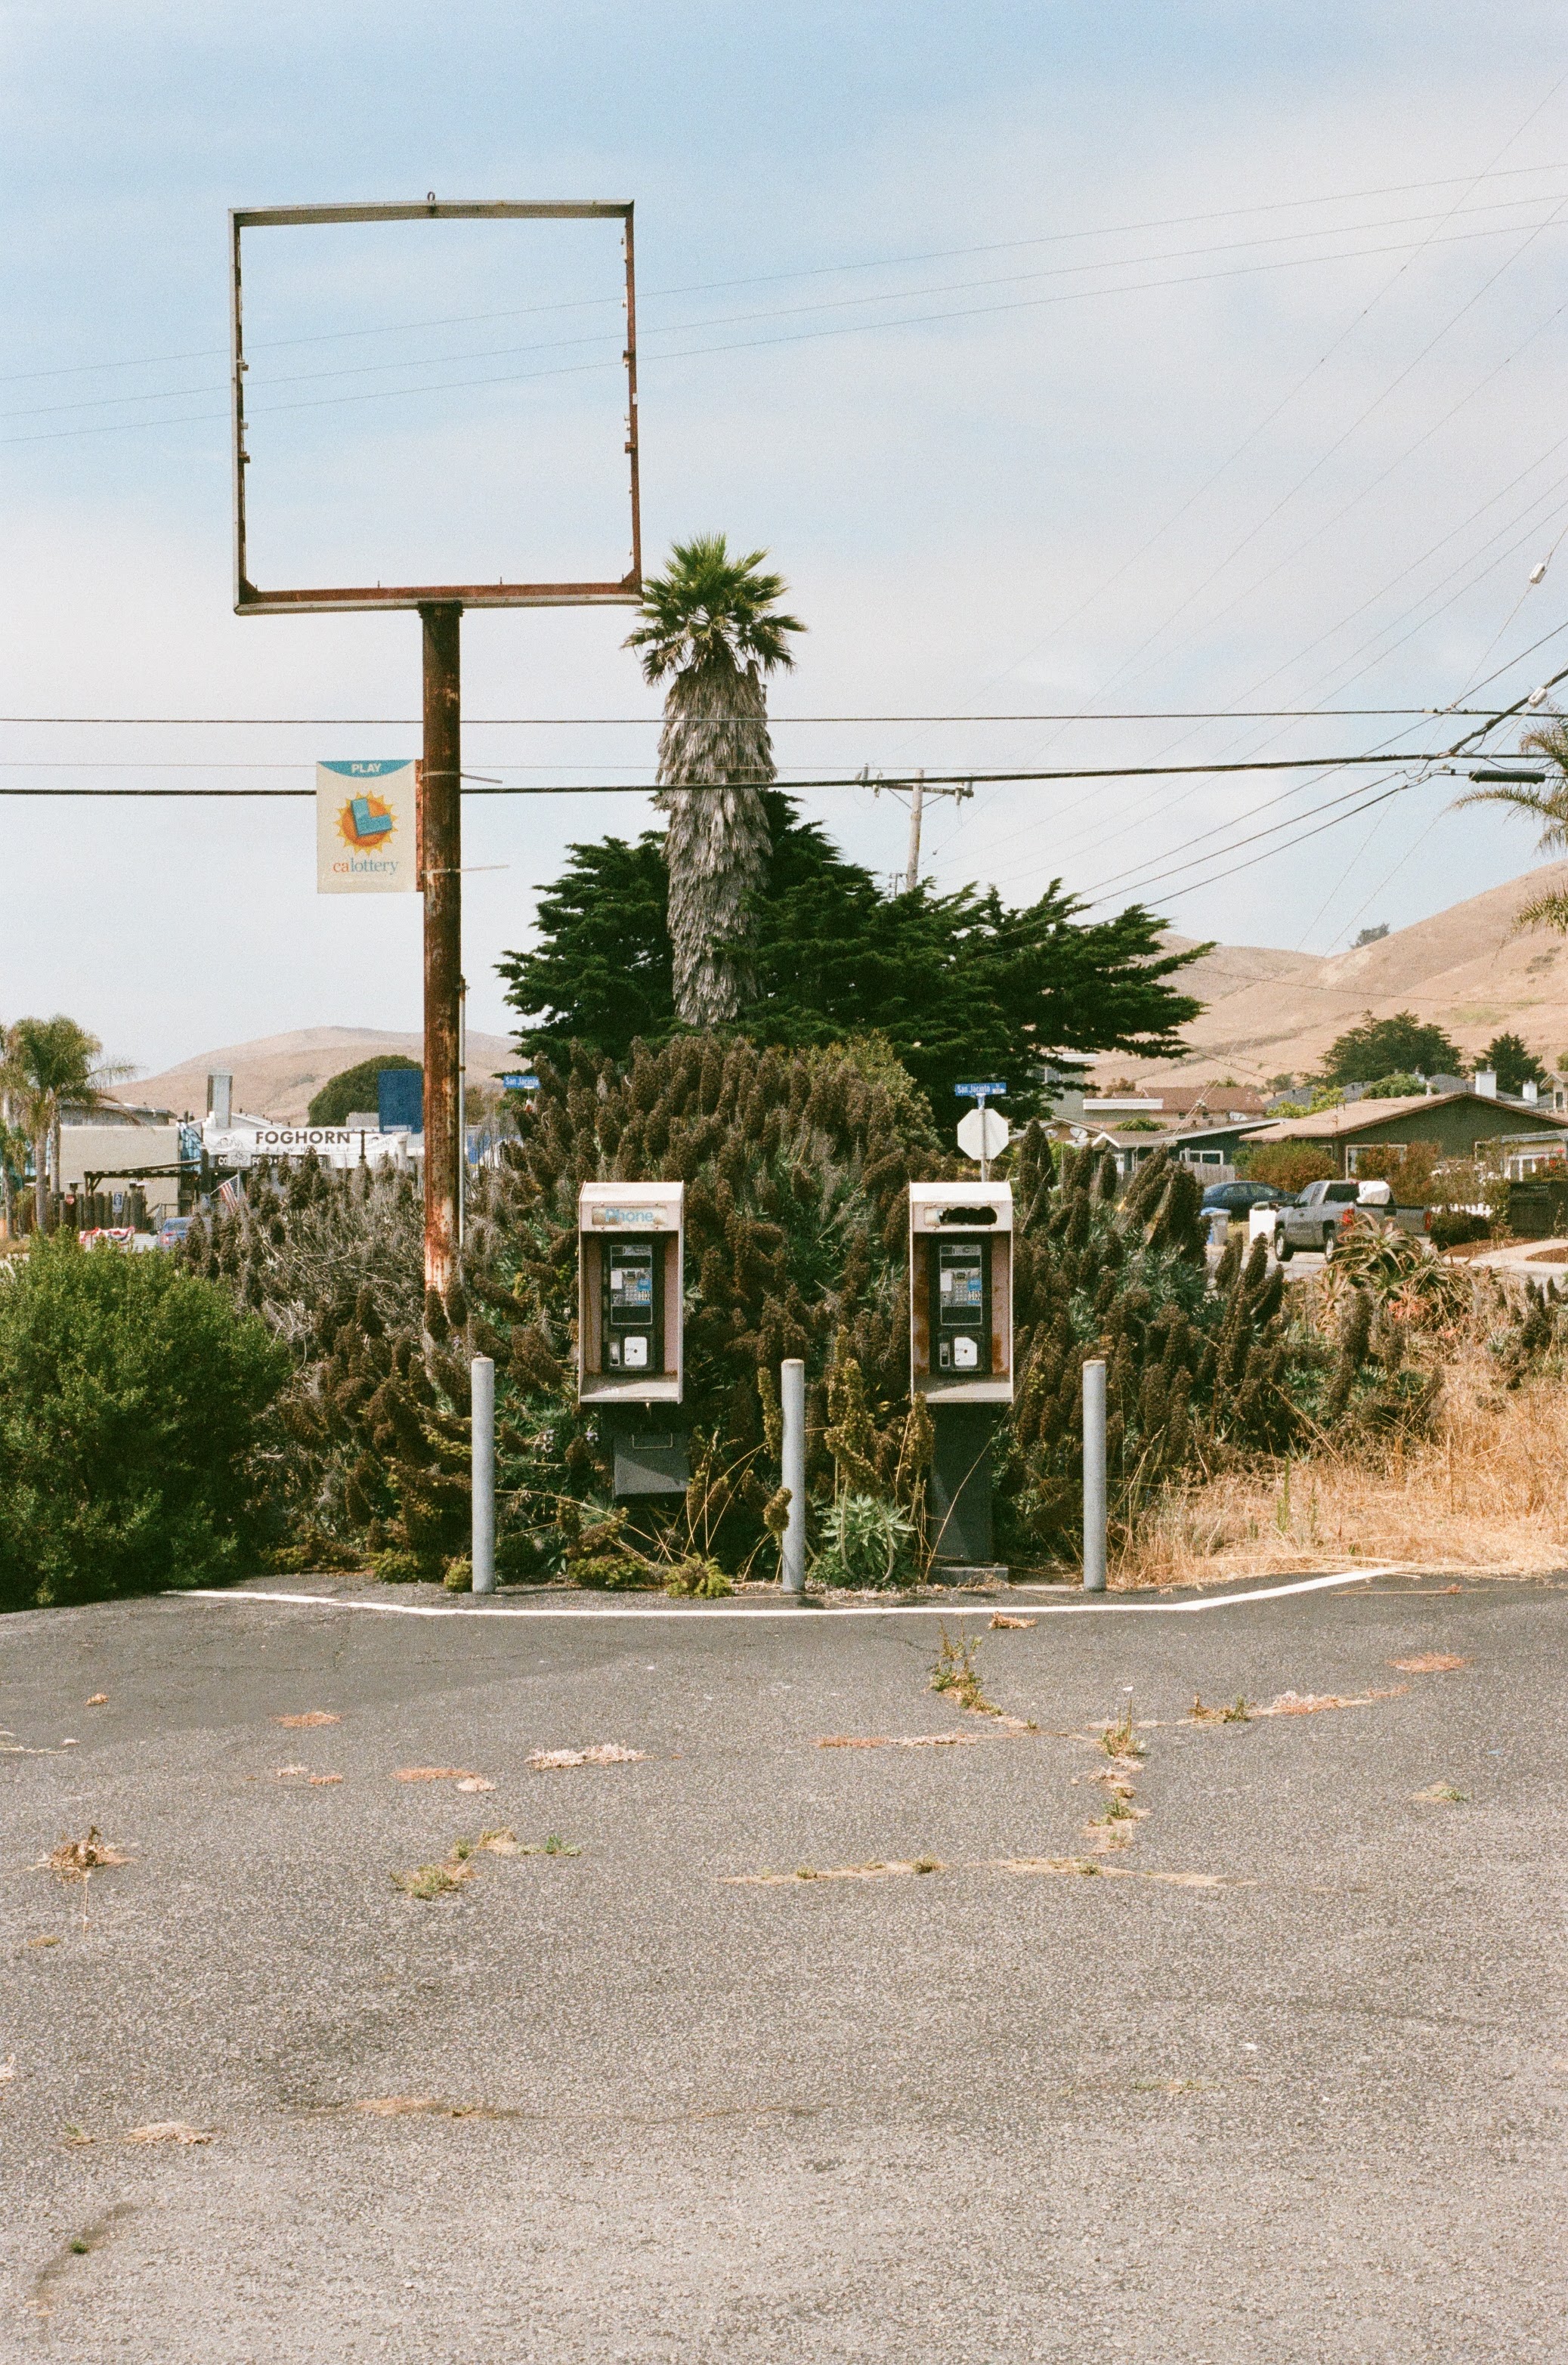 a 35mm photo of some payphones